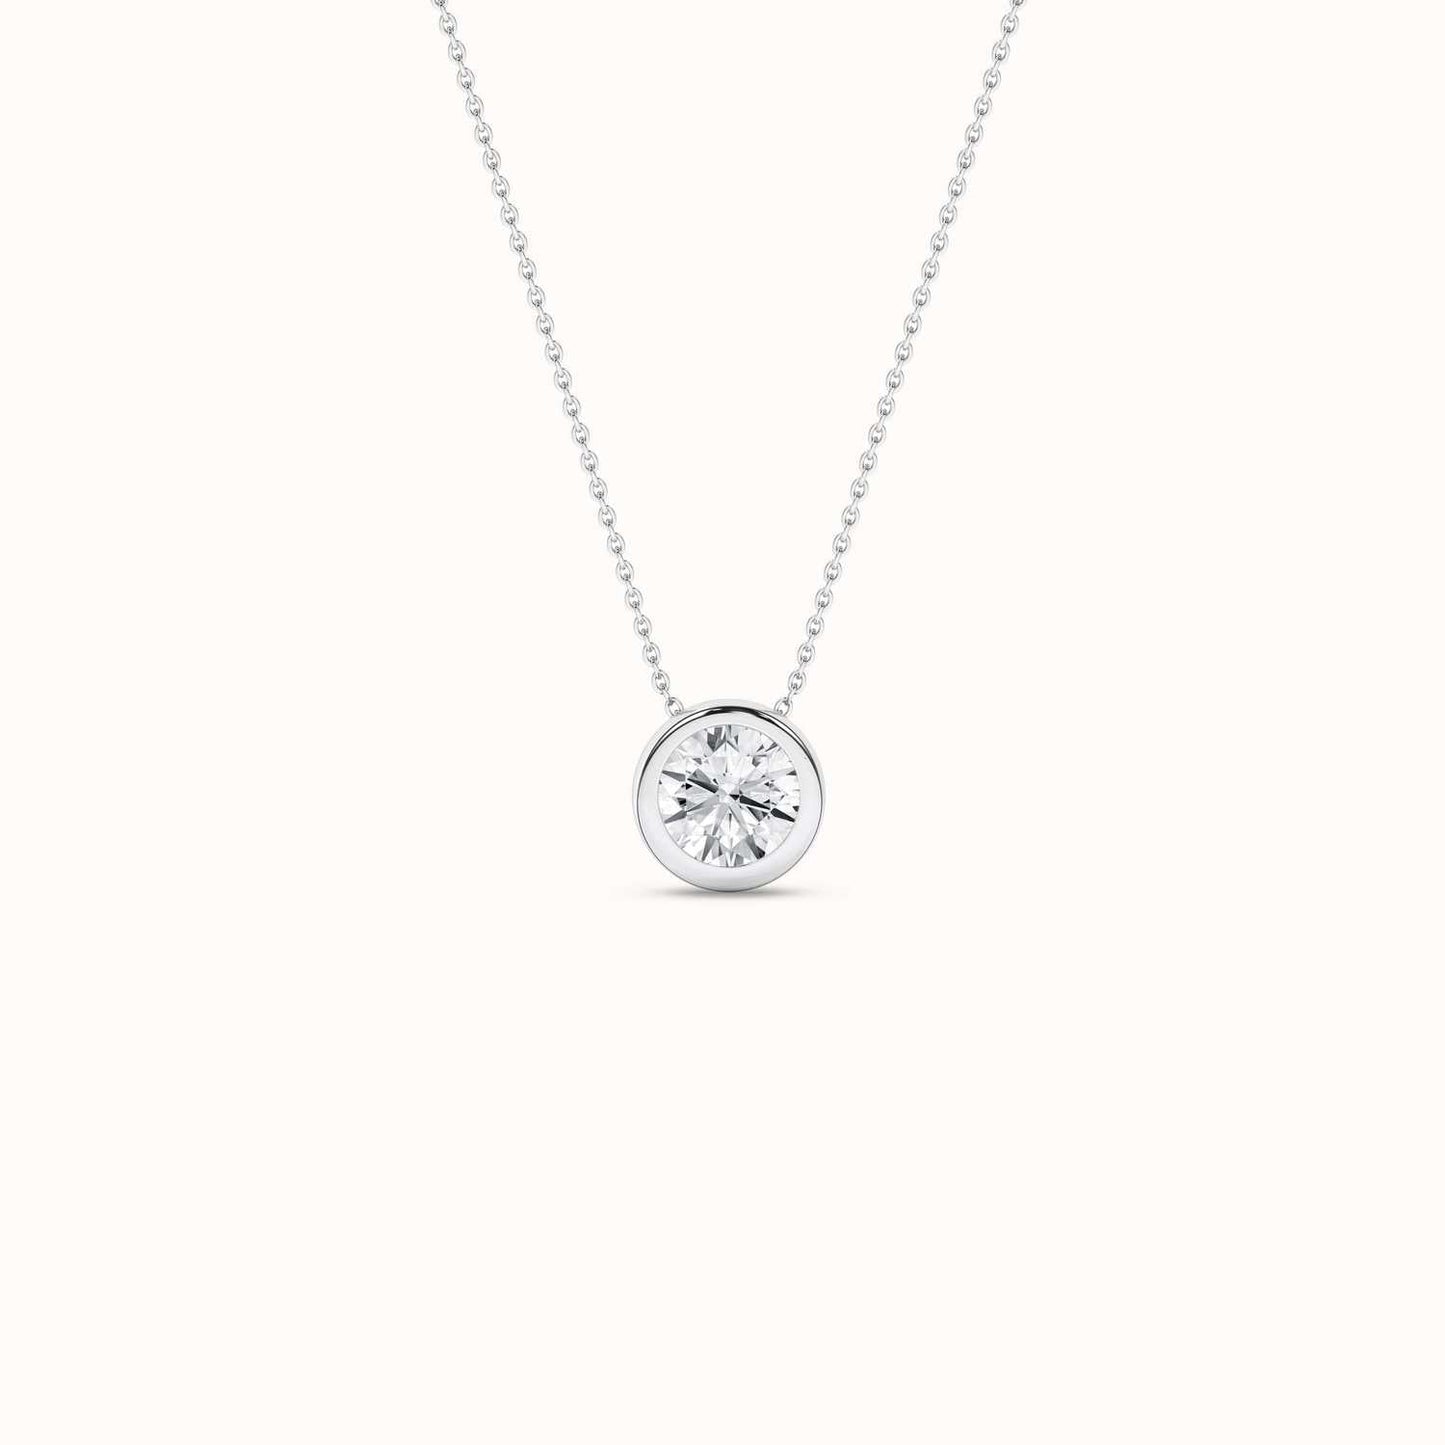 Encompassing Round Necklace_Product Angle_1/3Ct. - 1